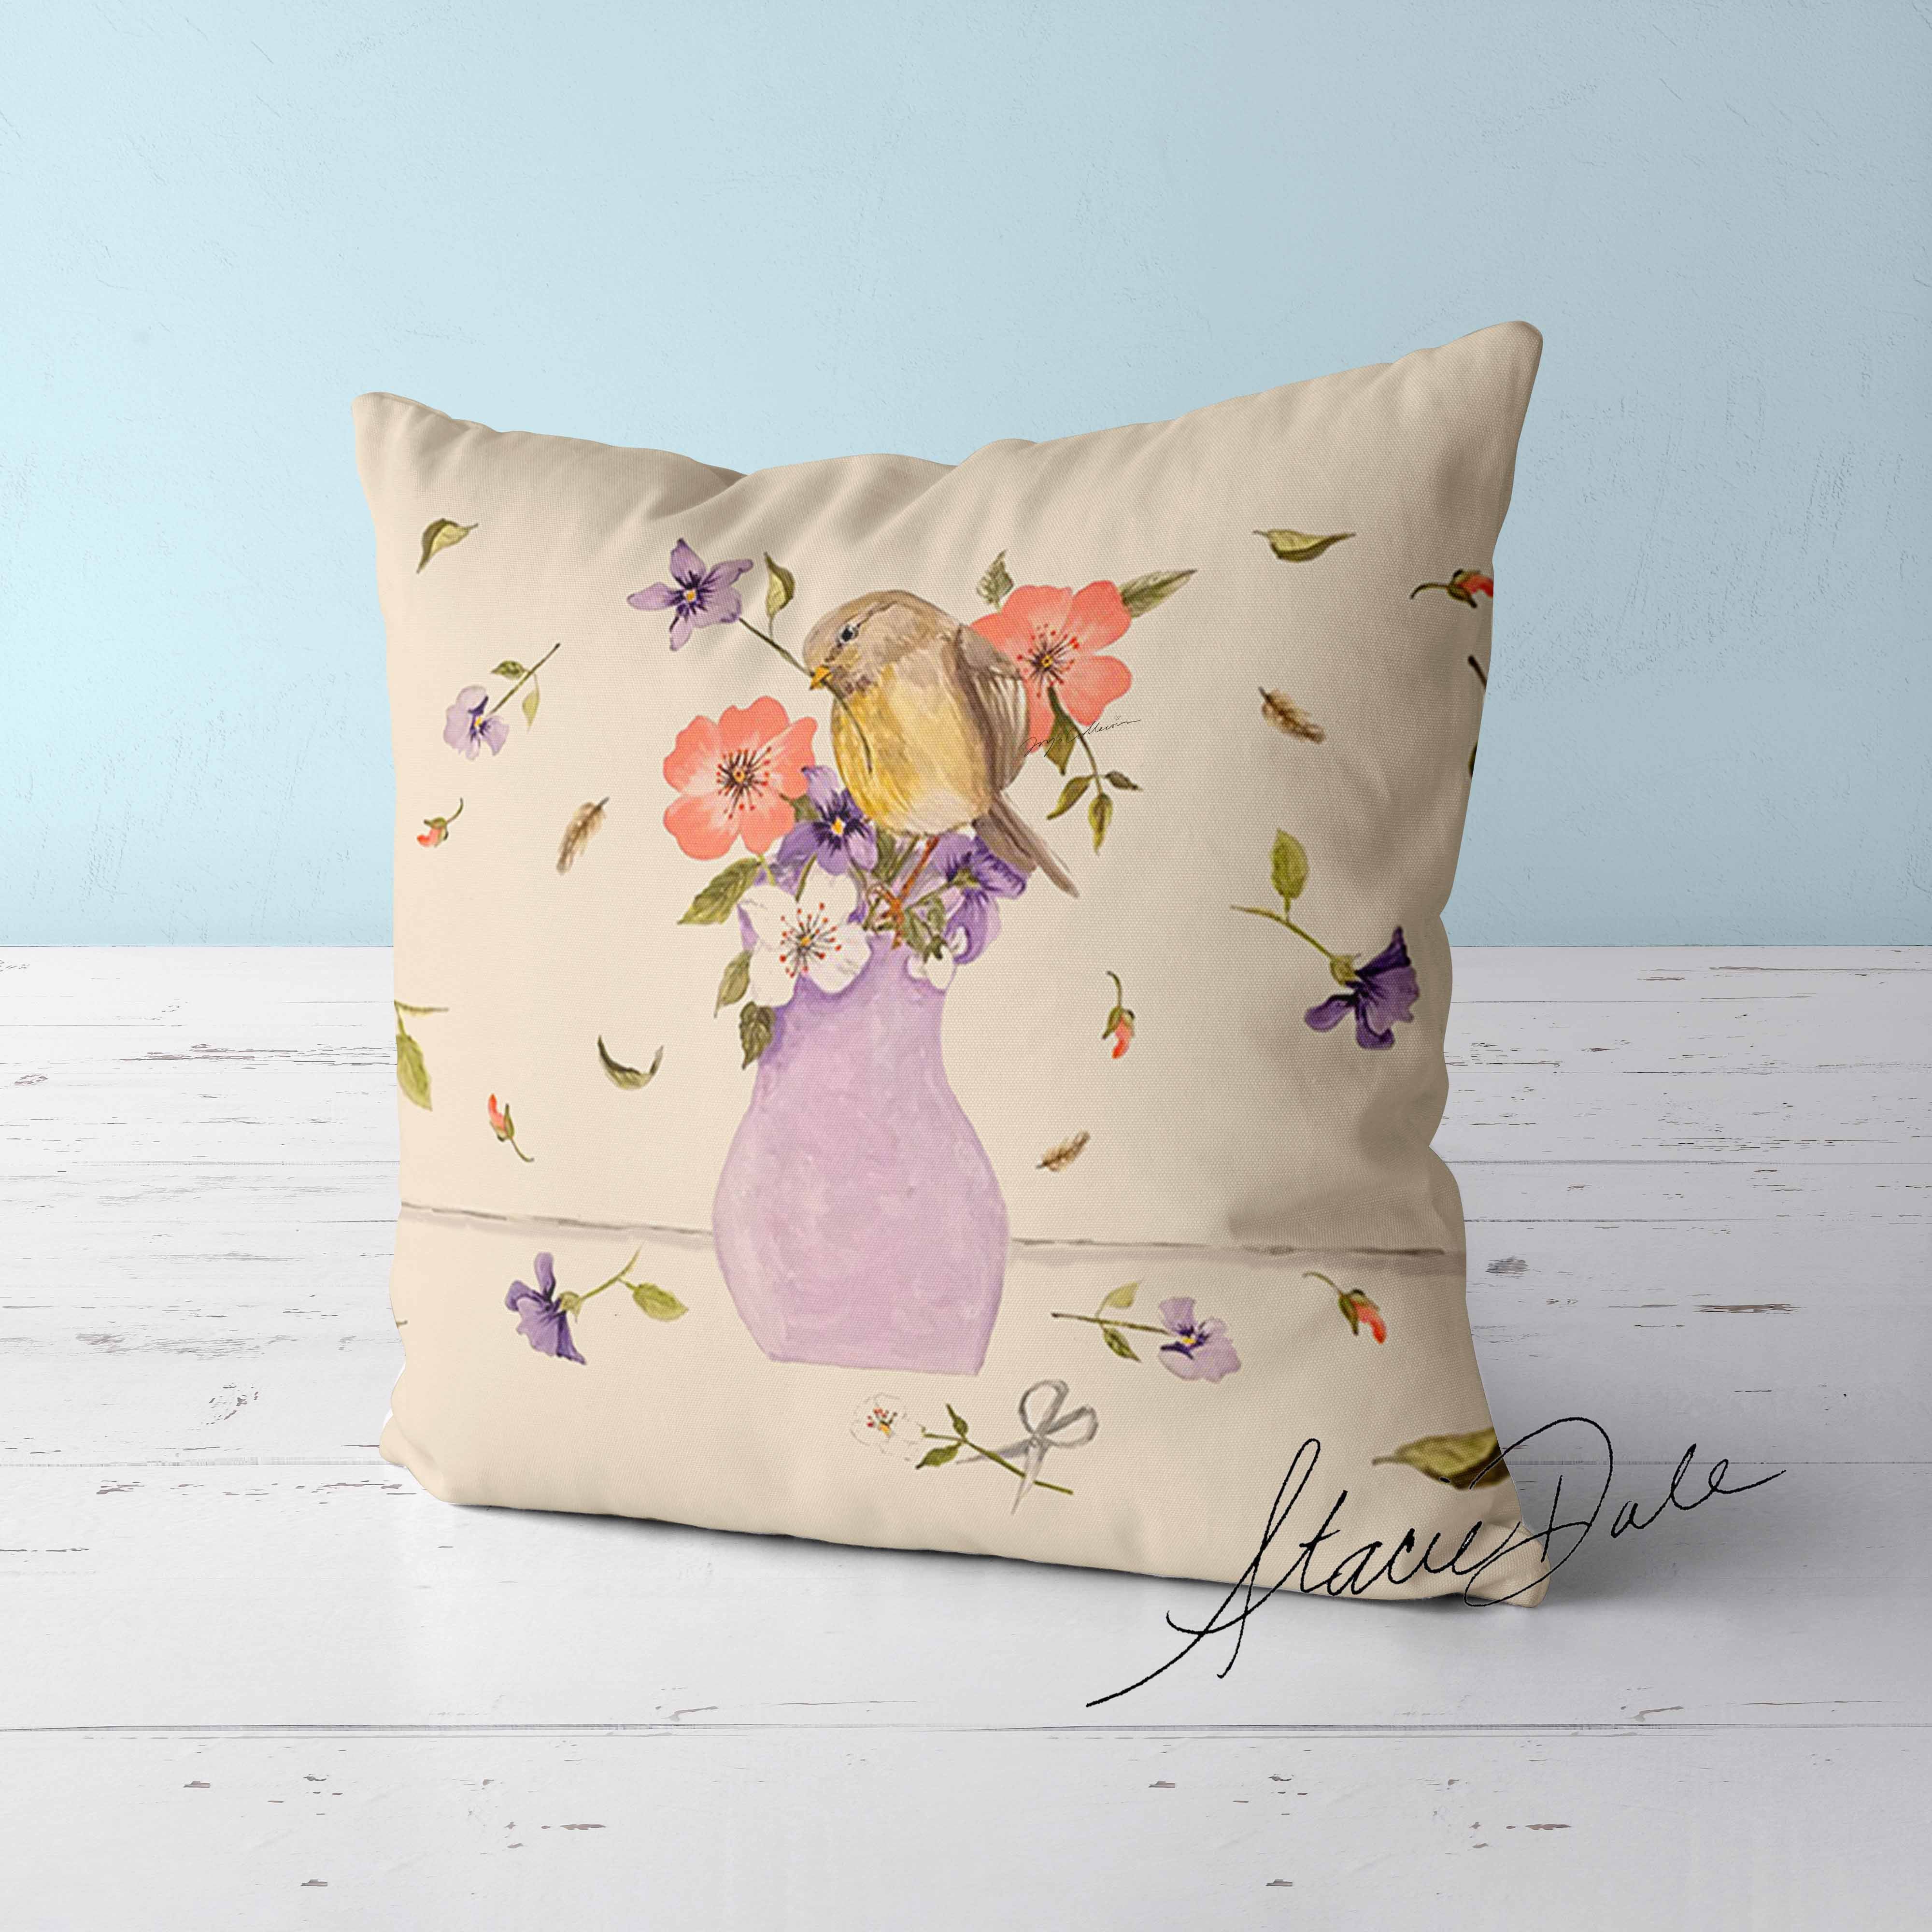 Feblilac Purple Vase Flower and Bird Cushion Covers Throw Pillow Covers by Stacie from USA